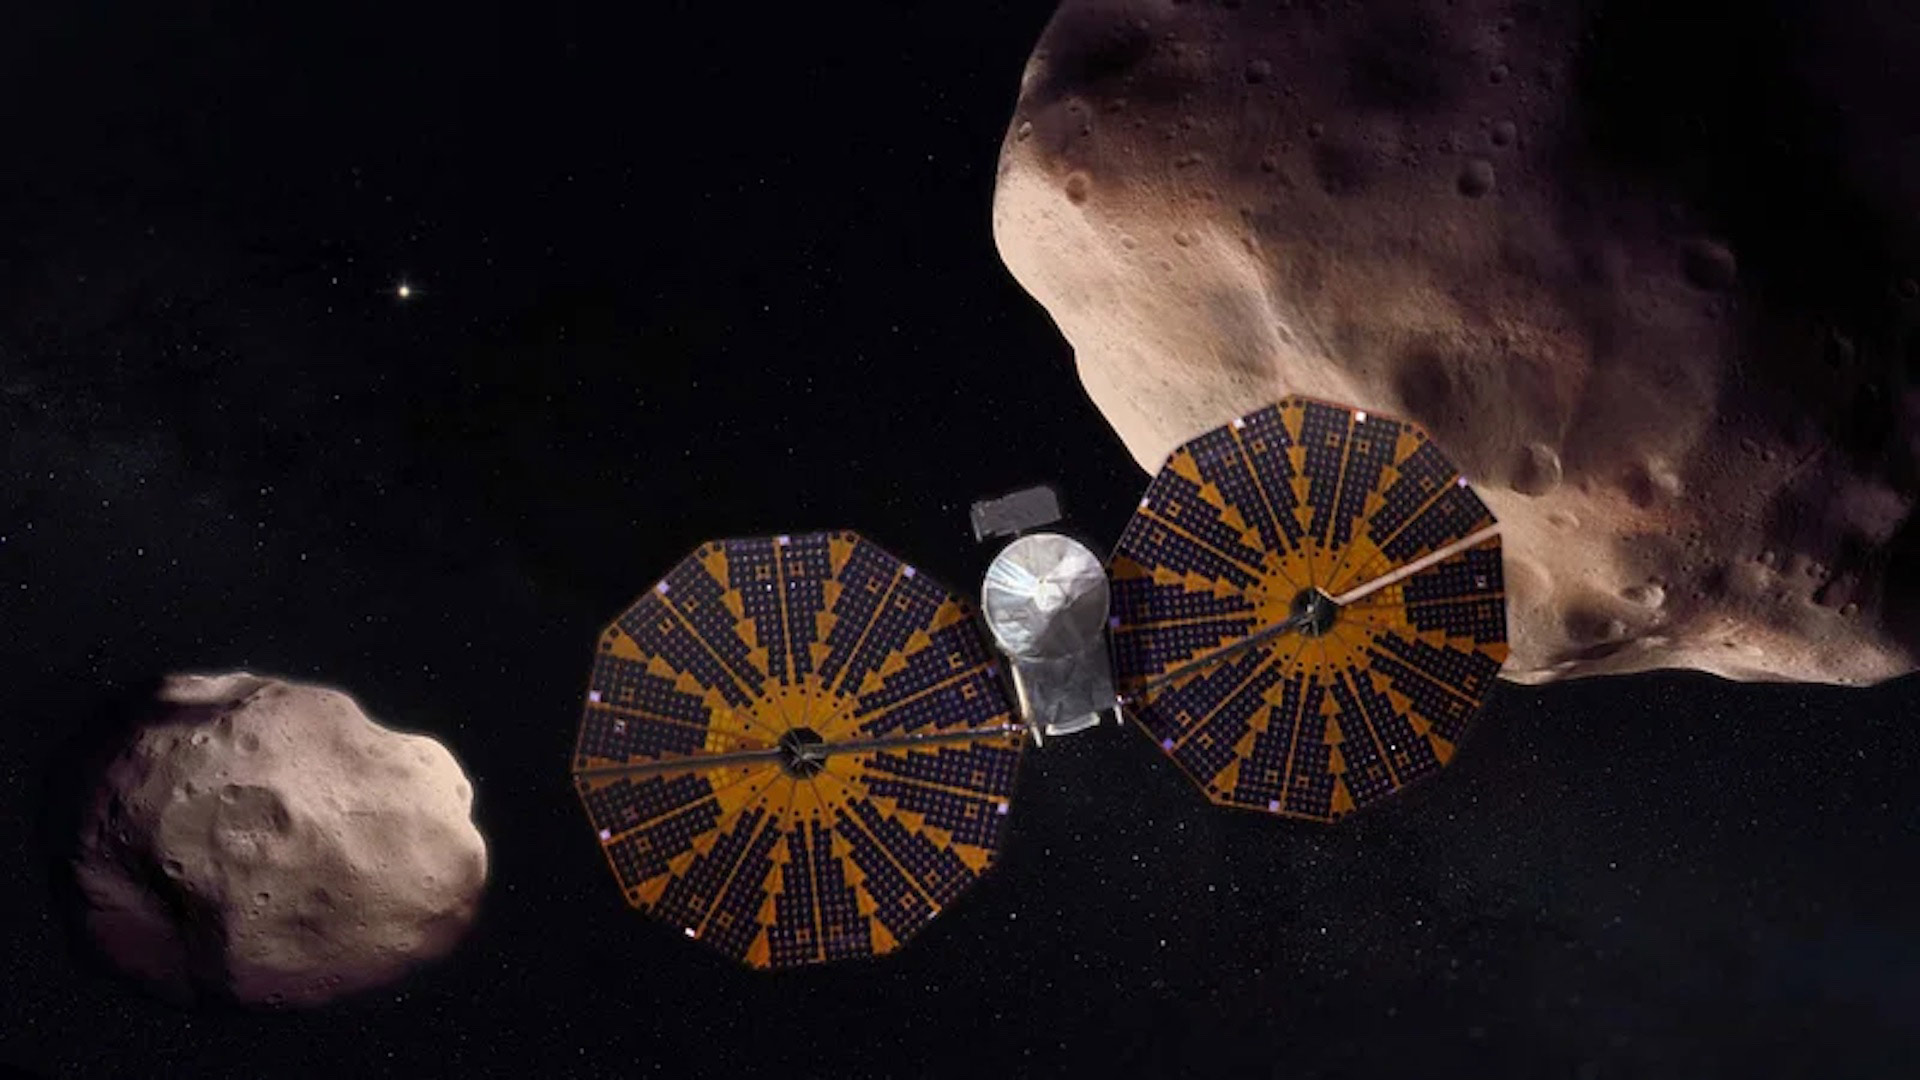 Illustration shows NASA's Lucy spacecraft visiting multiple asteroids during a 12 year mission.